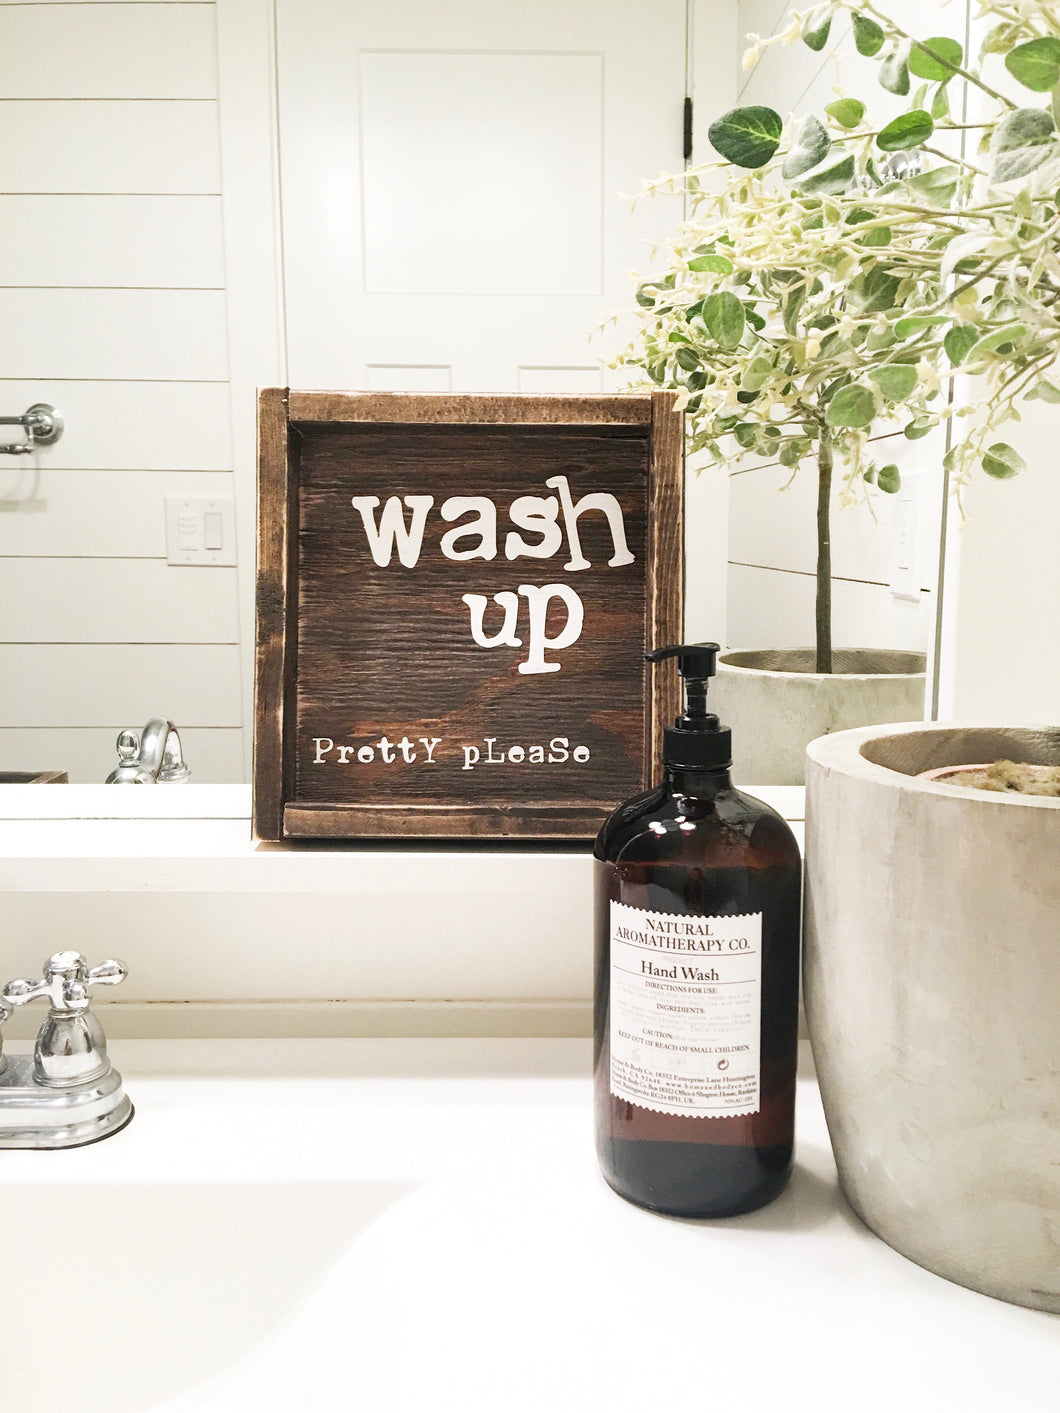 Wash up, pretty please - Wood Sign